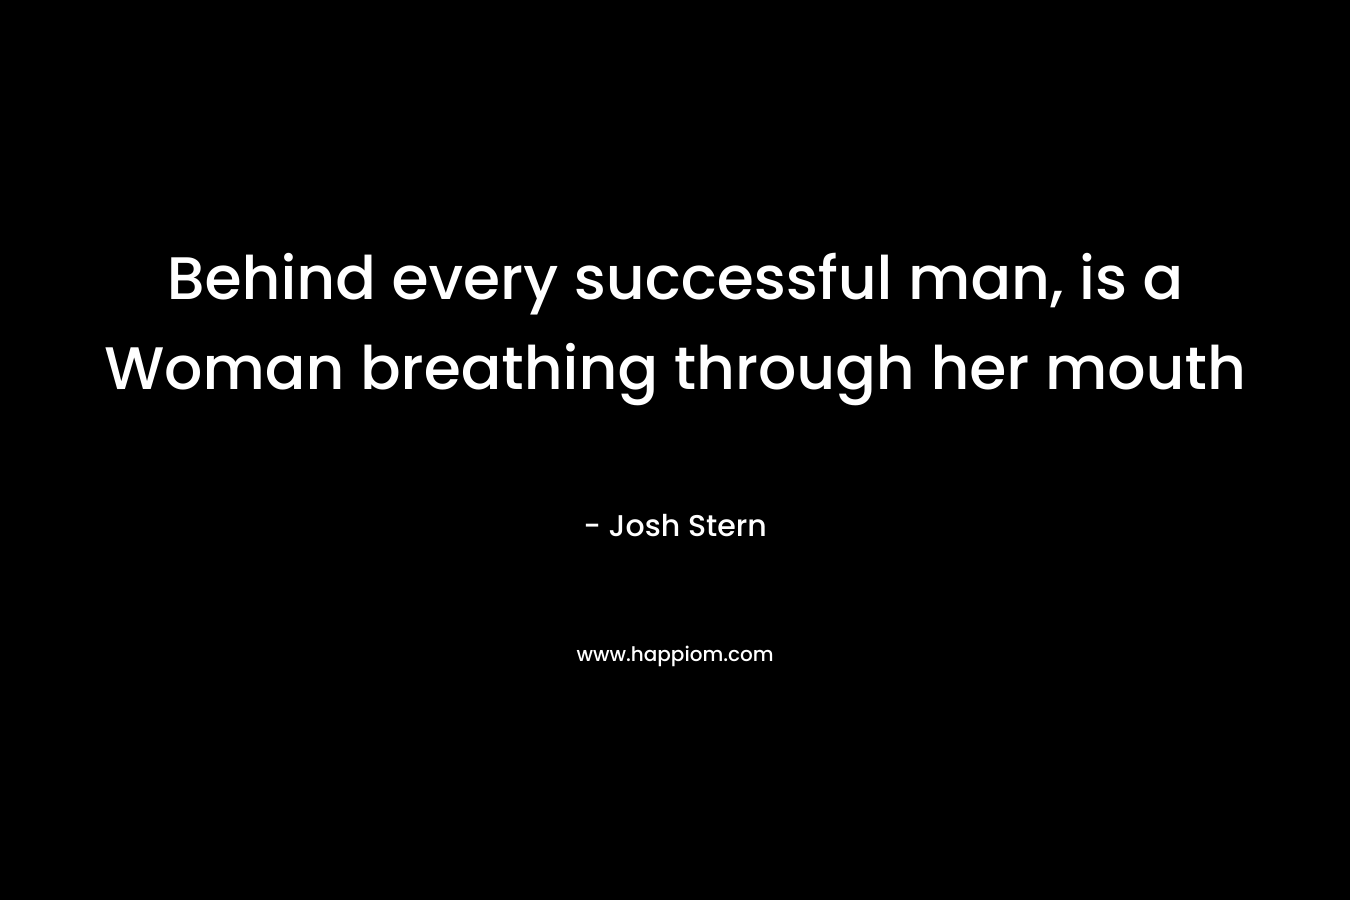 Behind every successful man, is a Woman breathing through her mouth